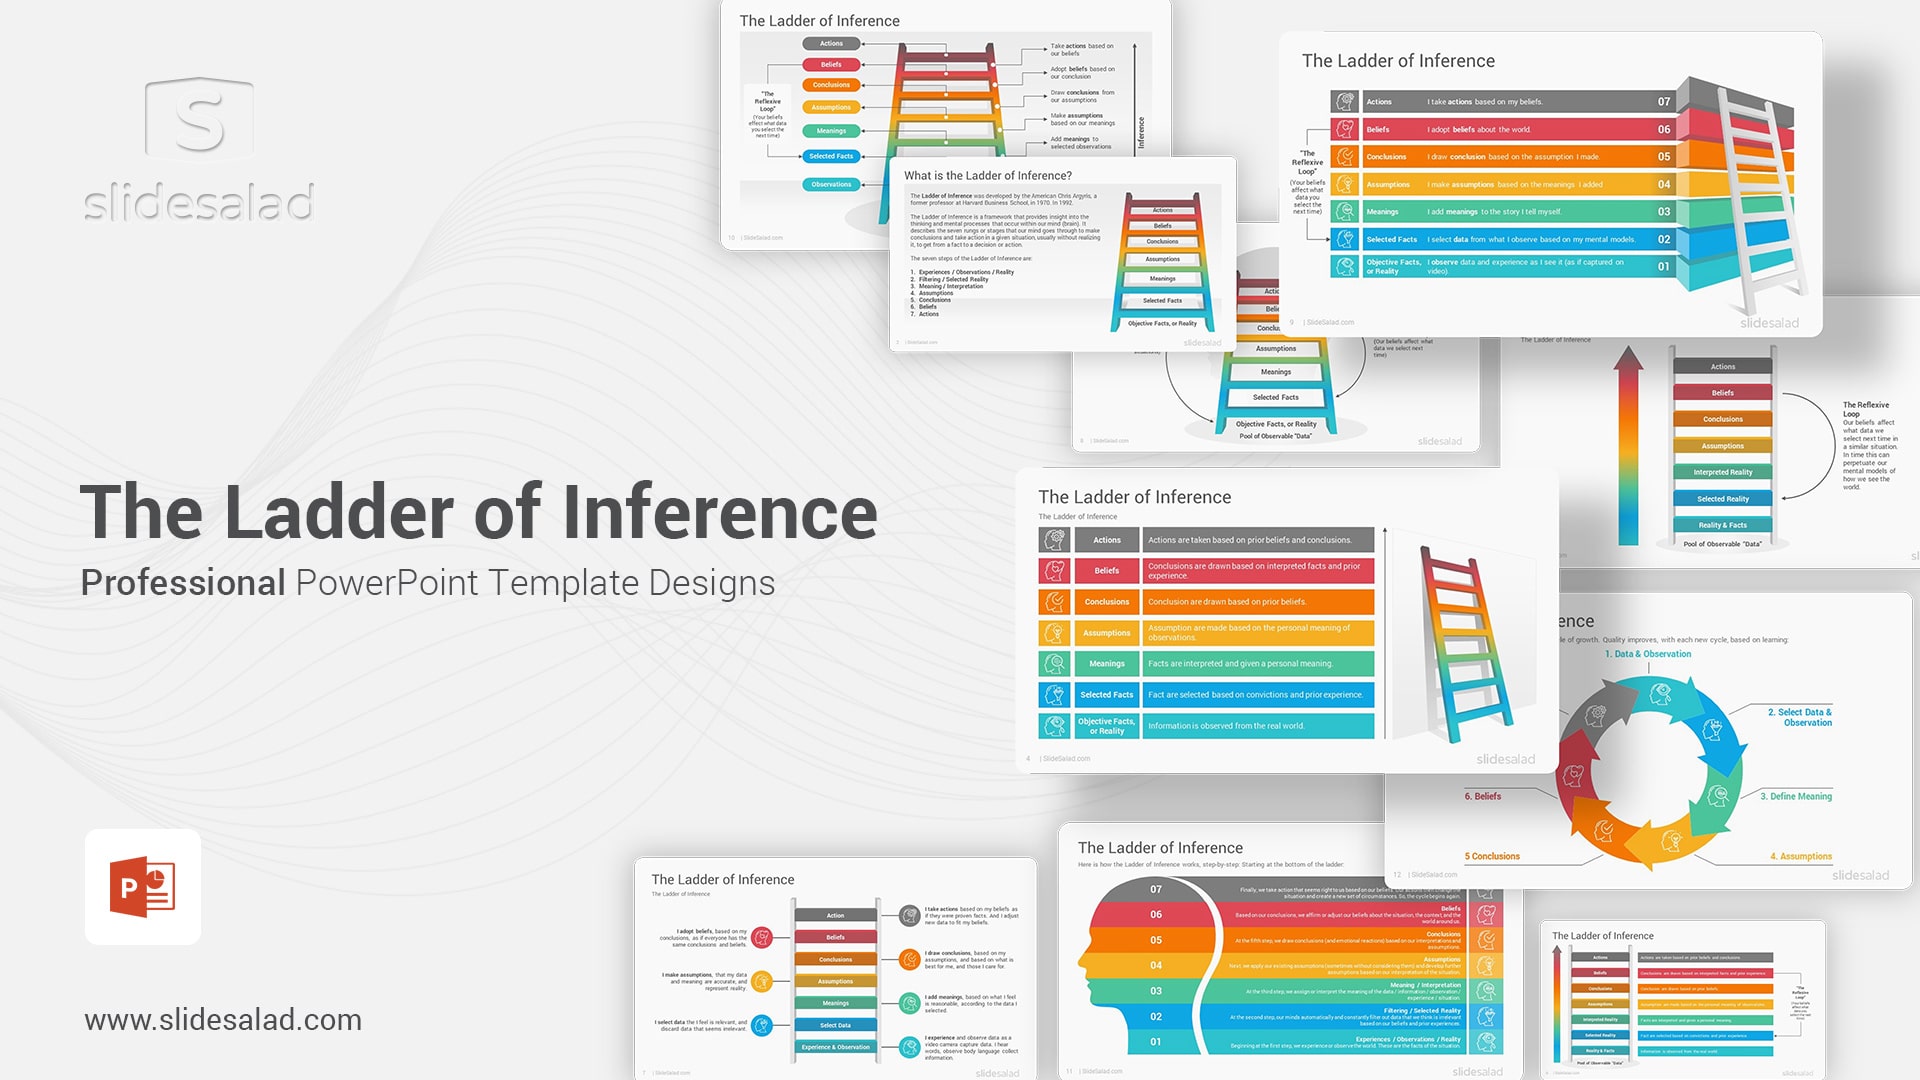 The Ladder of Inference PowerPoint Template Diagrams - All in One Decision Making Tool to Make Decisions Based on the Reality